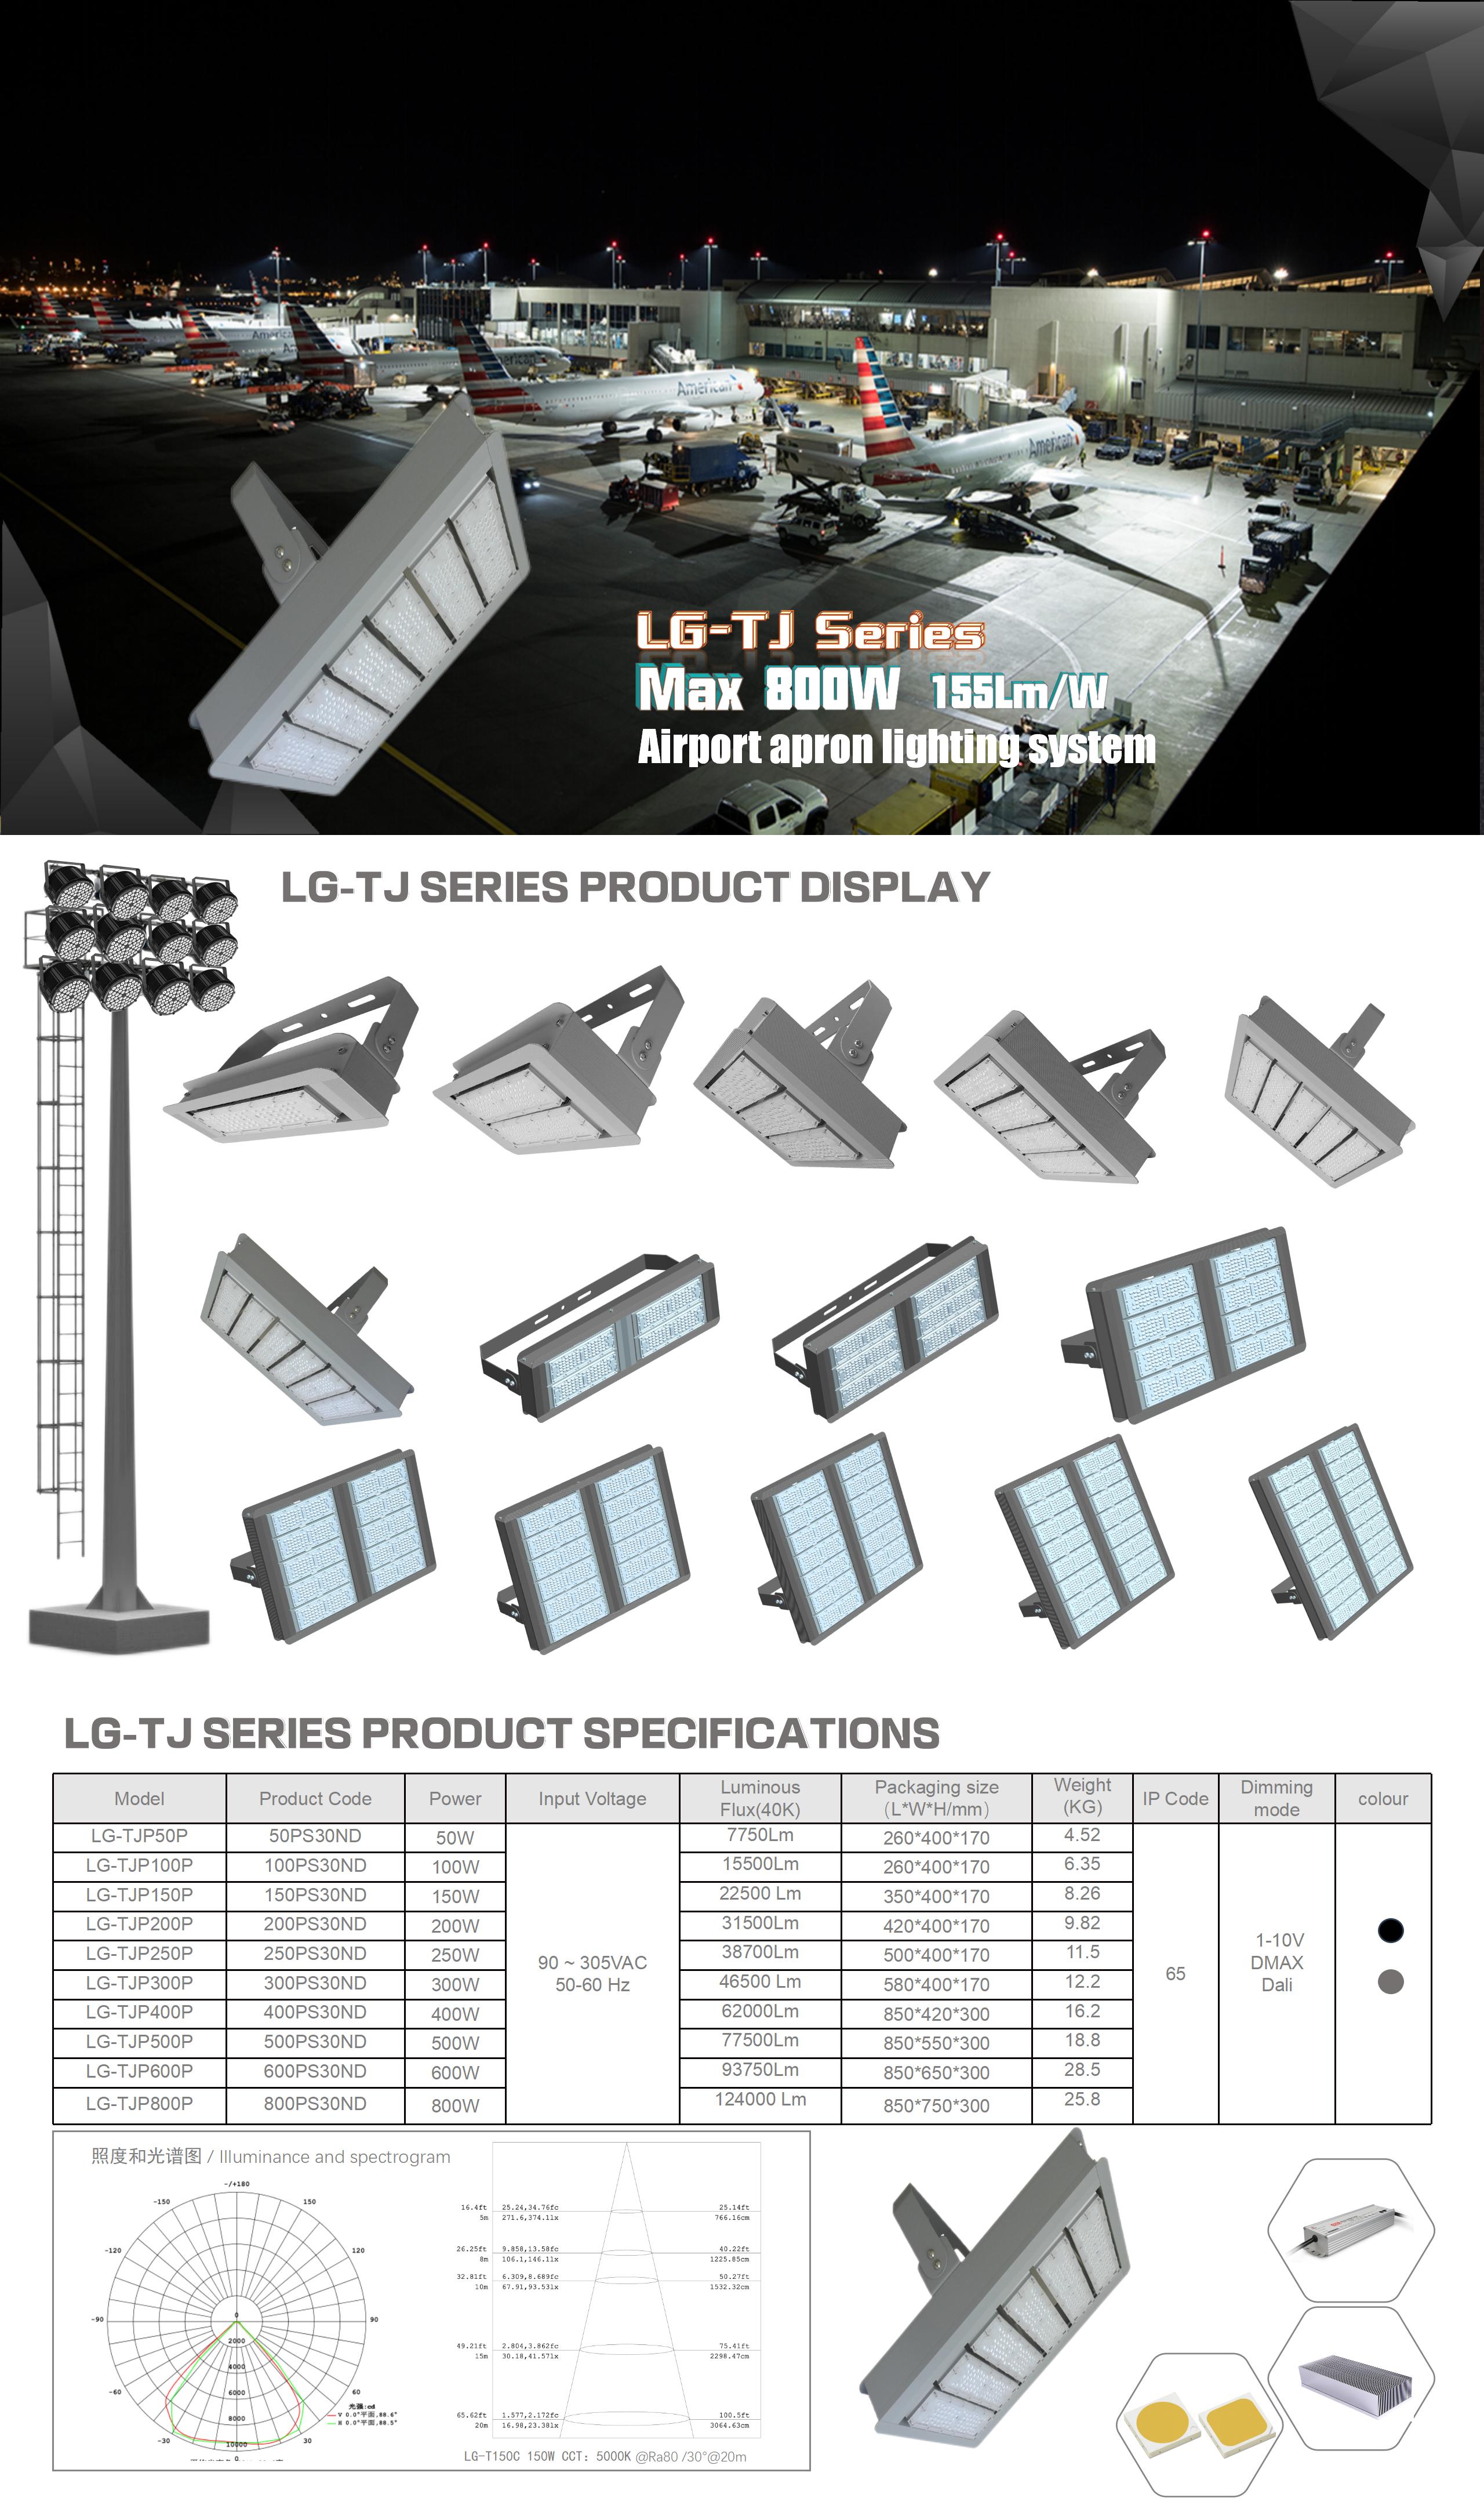 LG-TJ series high-power airport apron special lighting system